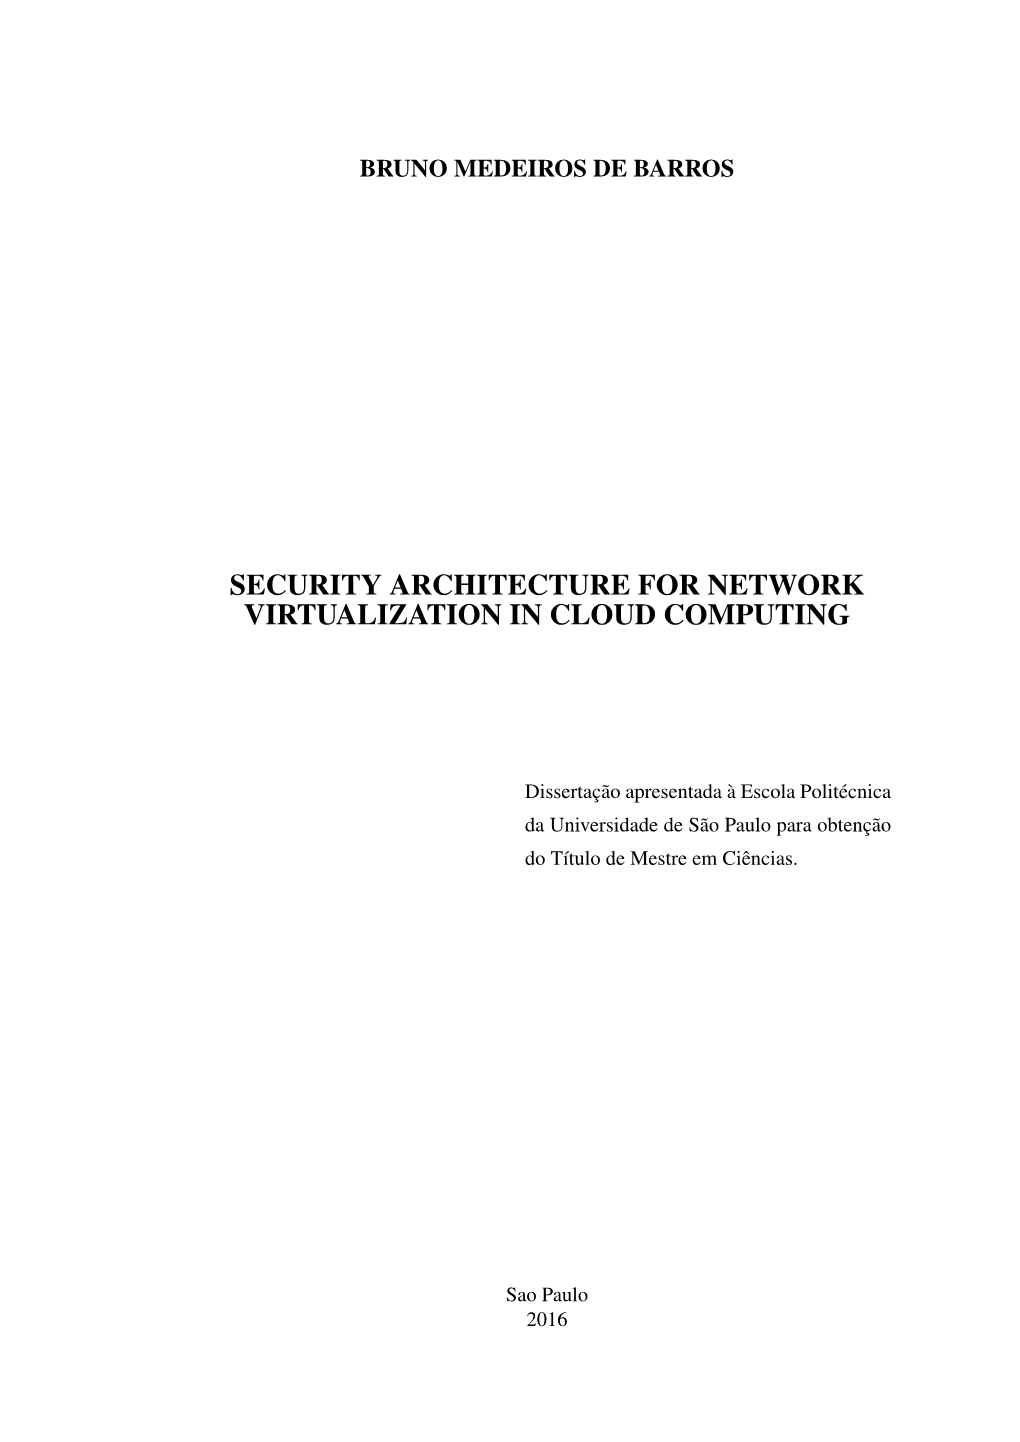 Security Architecture for Network Virtualization in Cloud Computing